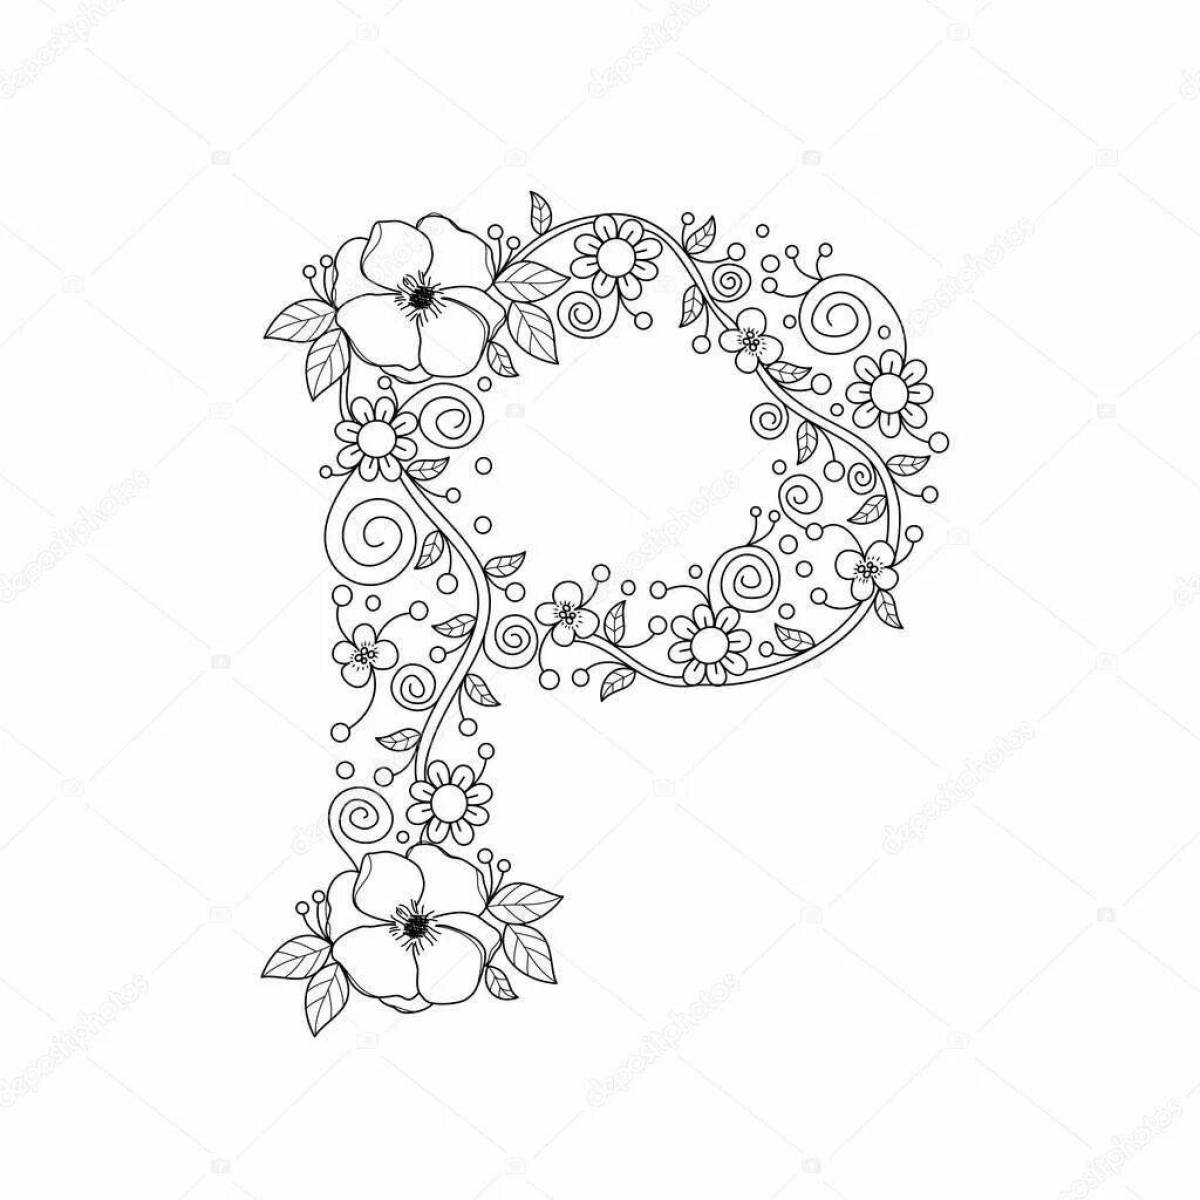 Awesome letter c with flowers